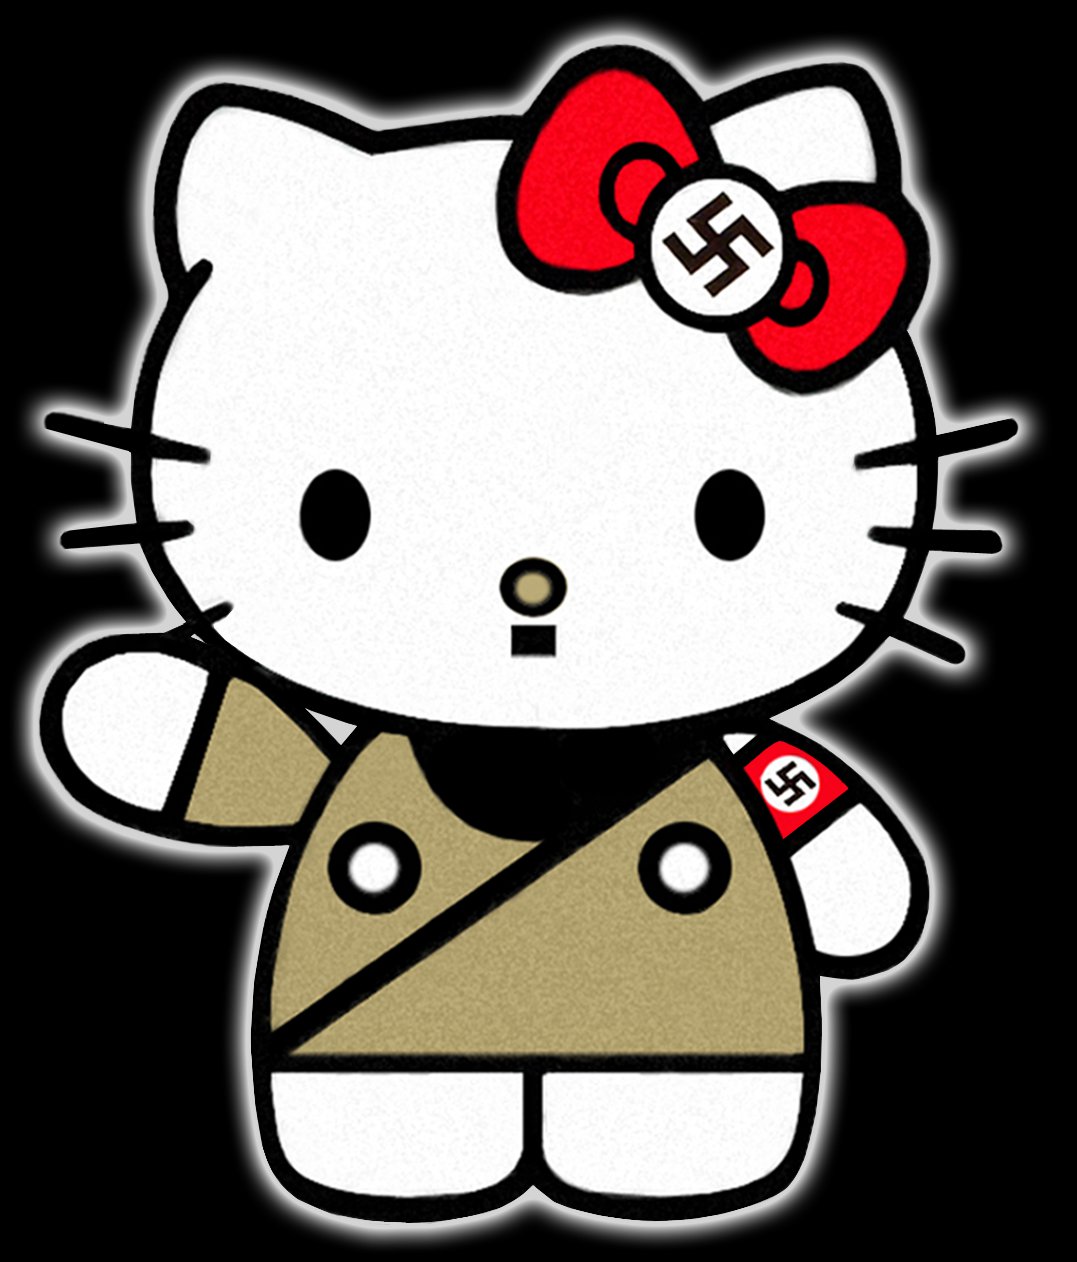 Now, how can anyone find Hello Kitty offensive? 